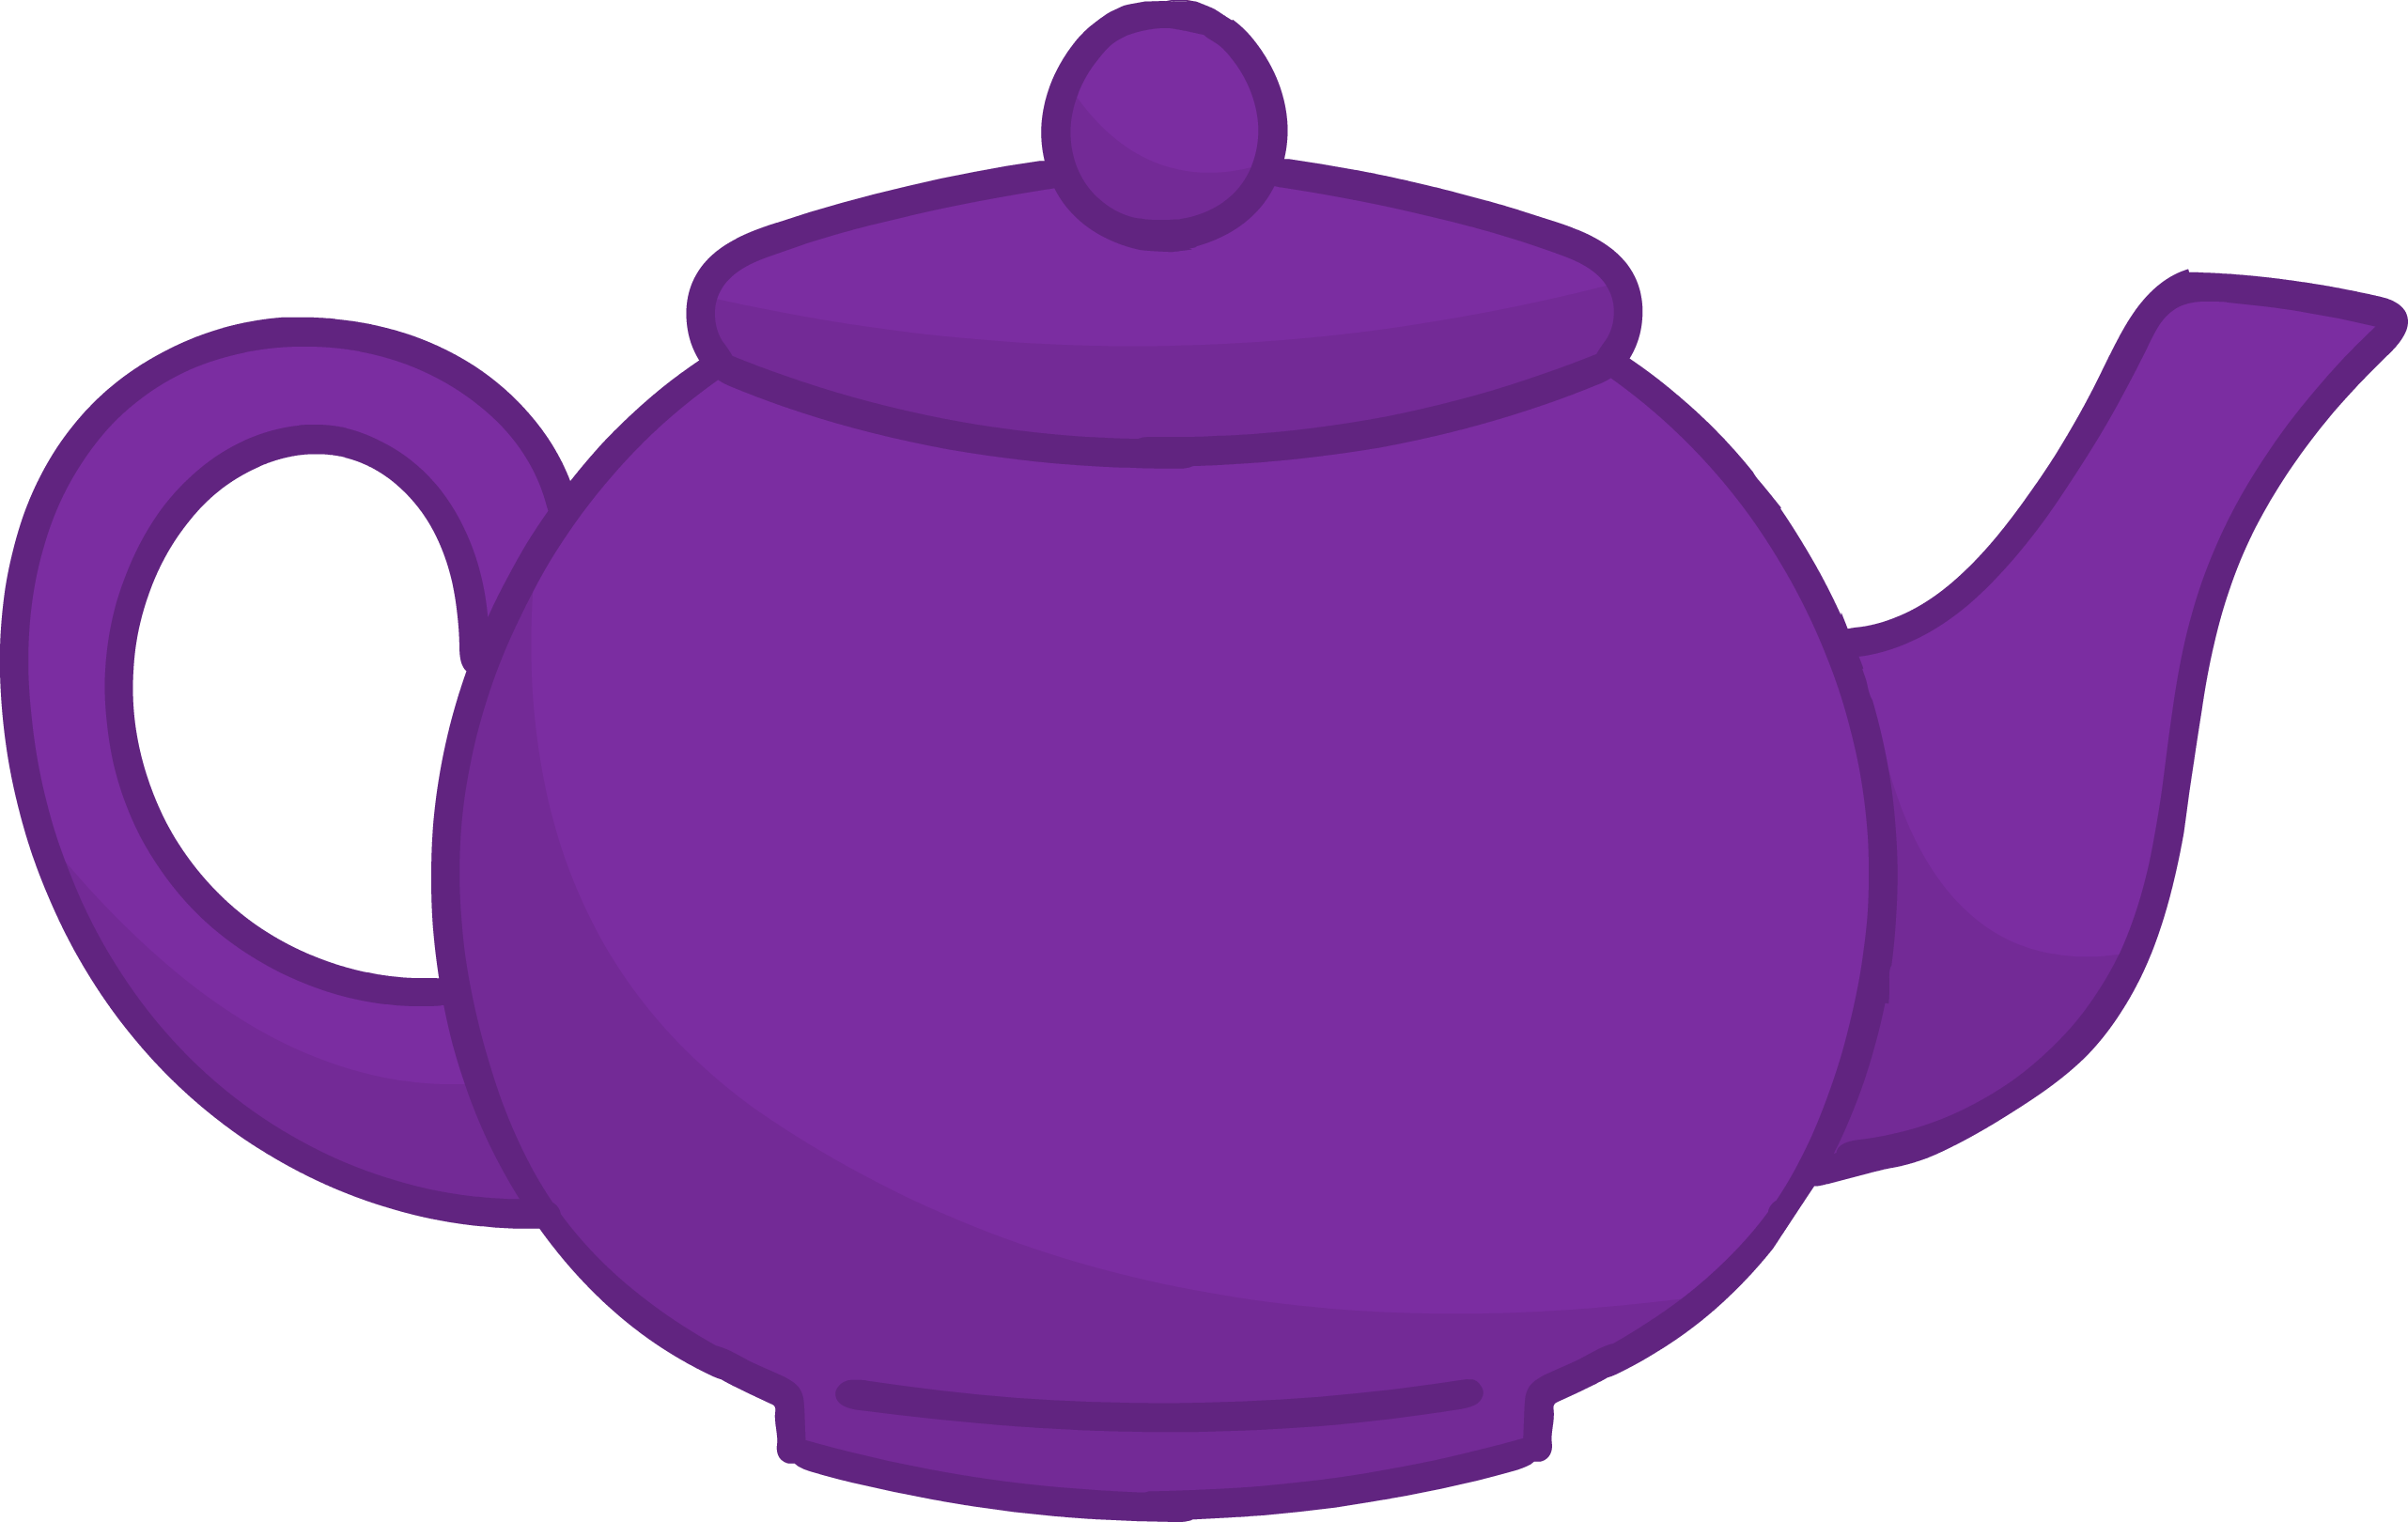 Tea Pot Image Free Download On Clipartmag